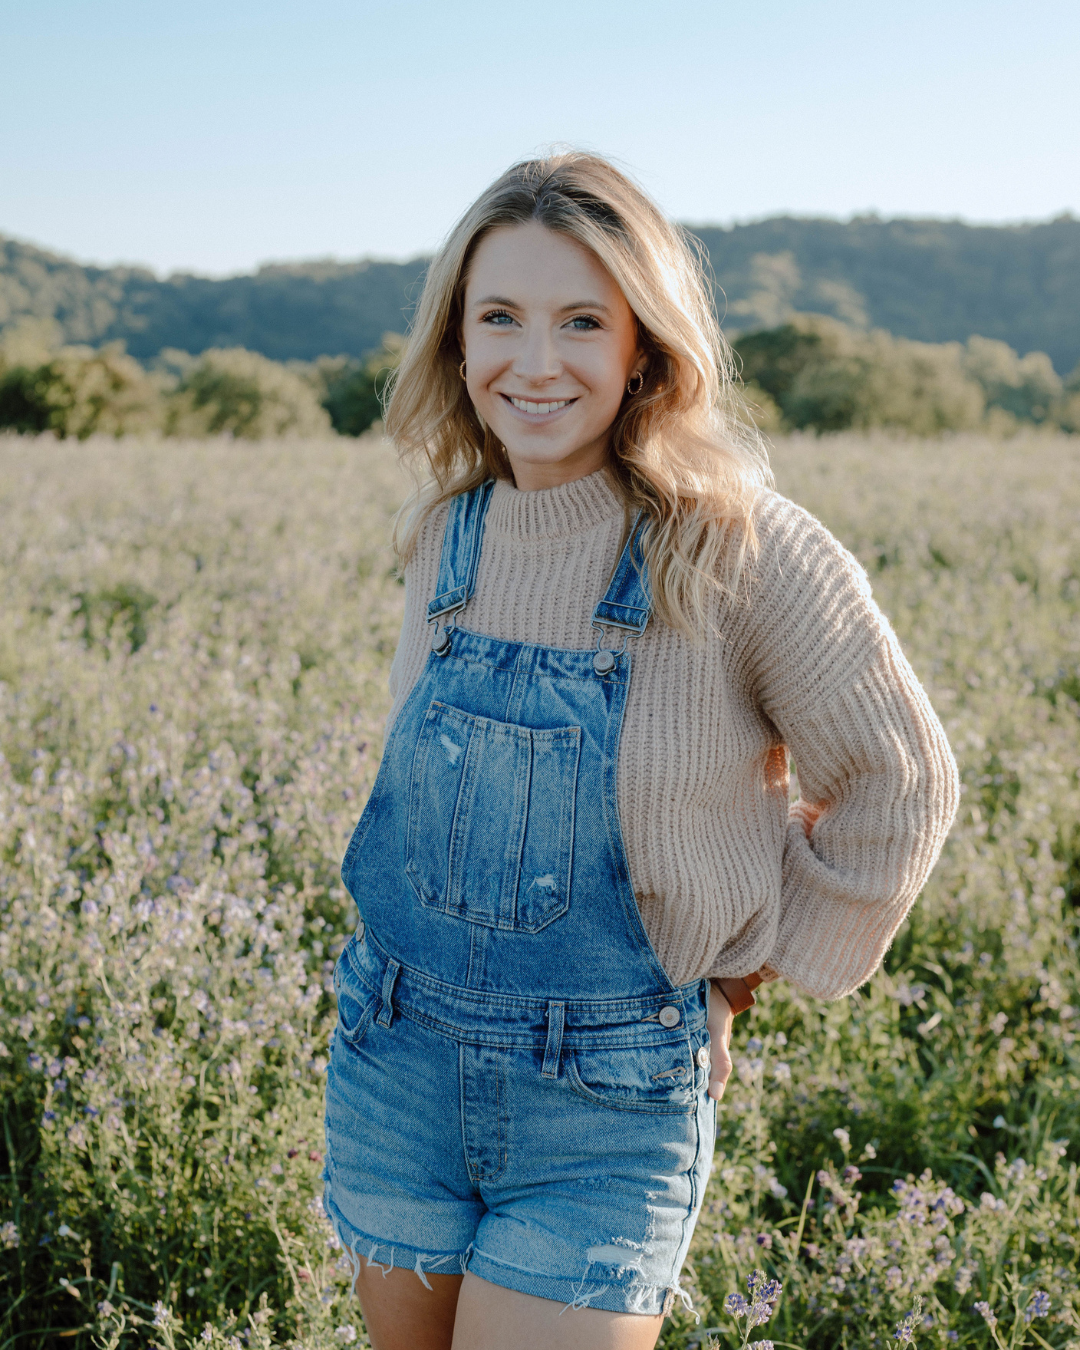 meet Emily your farmer friend sharing all things farming, food and friendship